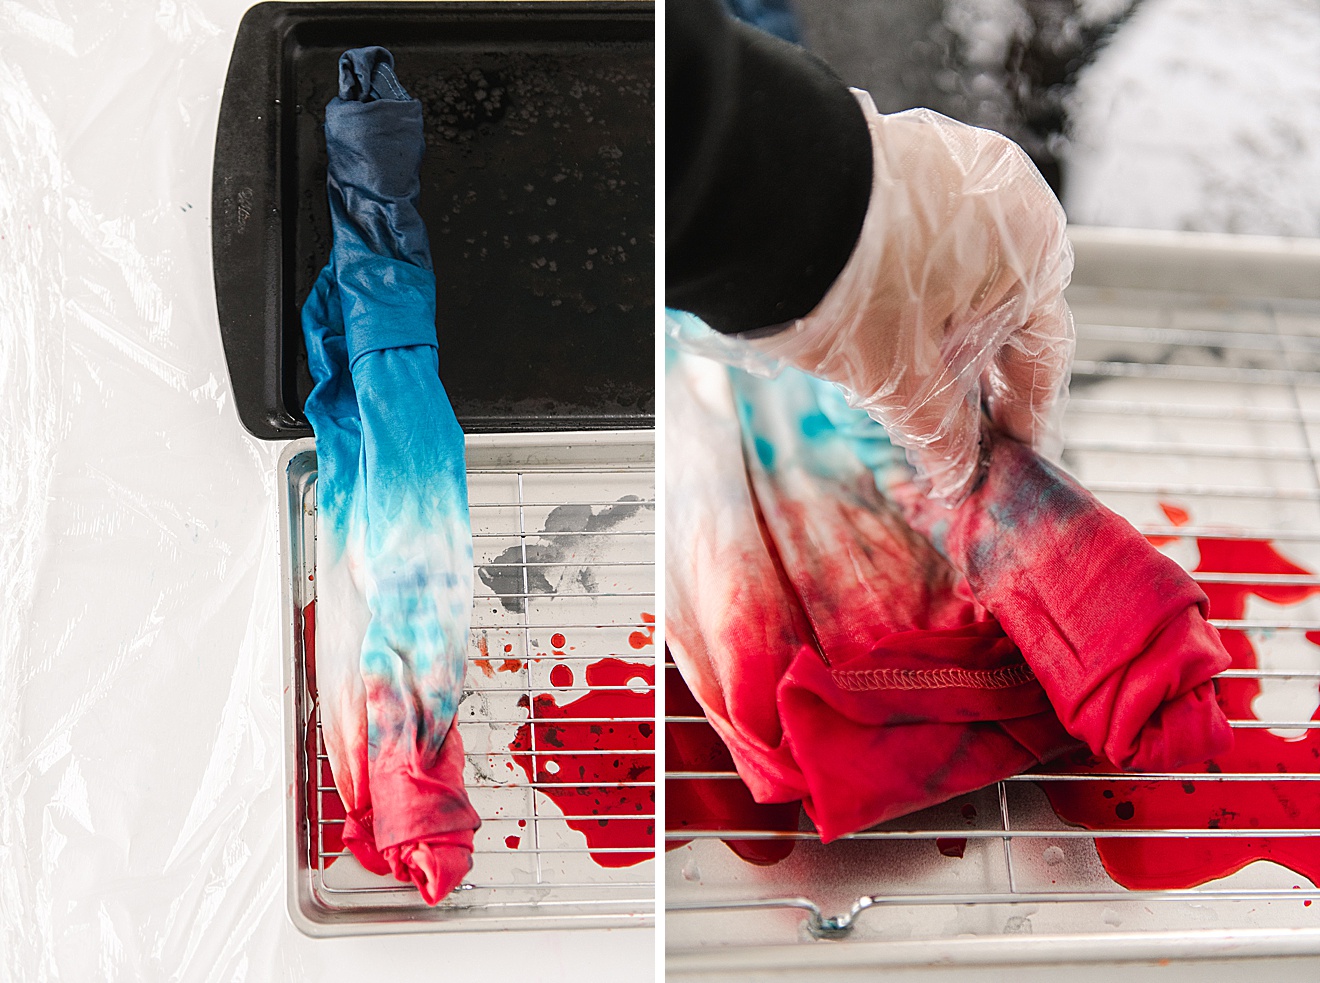 ombre tie dye, how to ombre tie dye, red white and blue tie dye dress, tie dye dress DIY, tie dye dress DIY oh yay studio, how to ombre tie dye